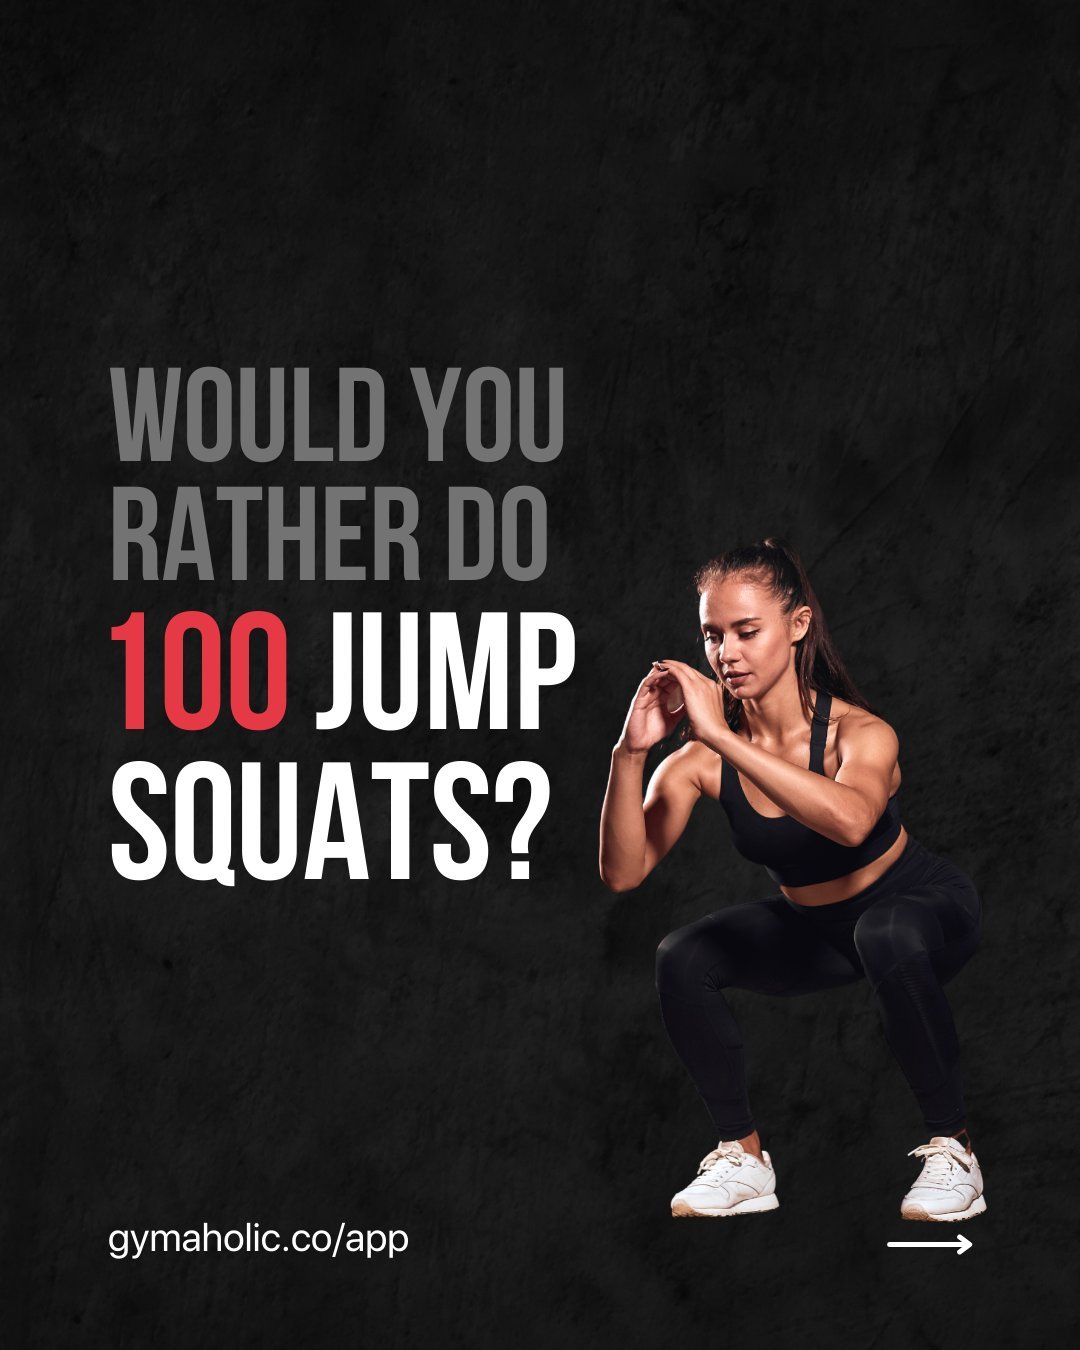 Would you rather do 100 jump squats or 100 burpees?